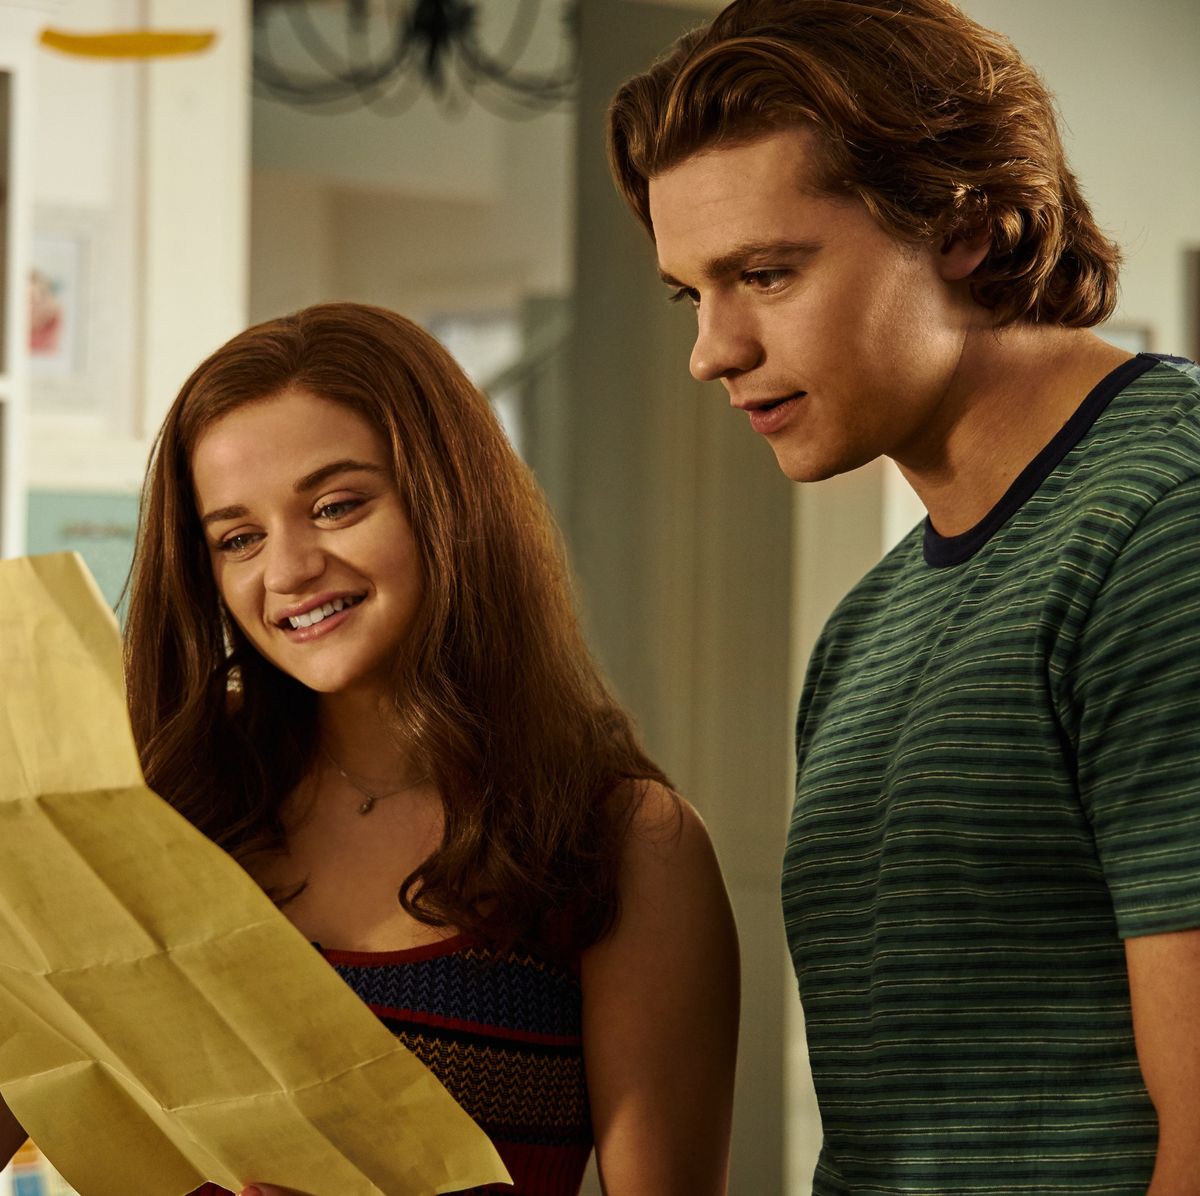 The Kissing Booth 4 - will it happen on Netflix?